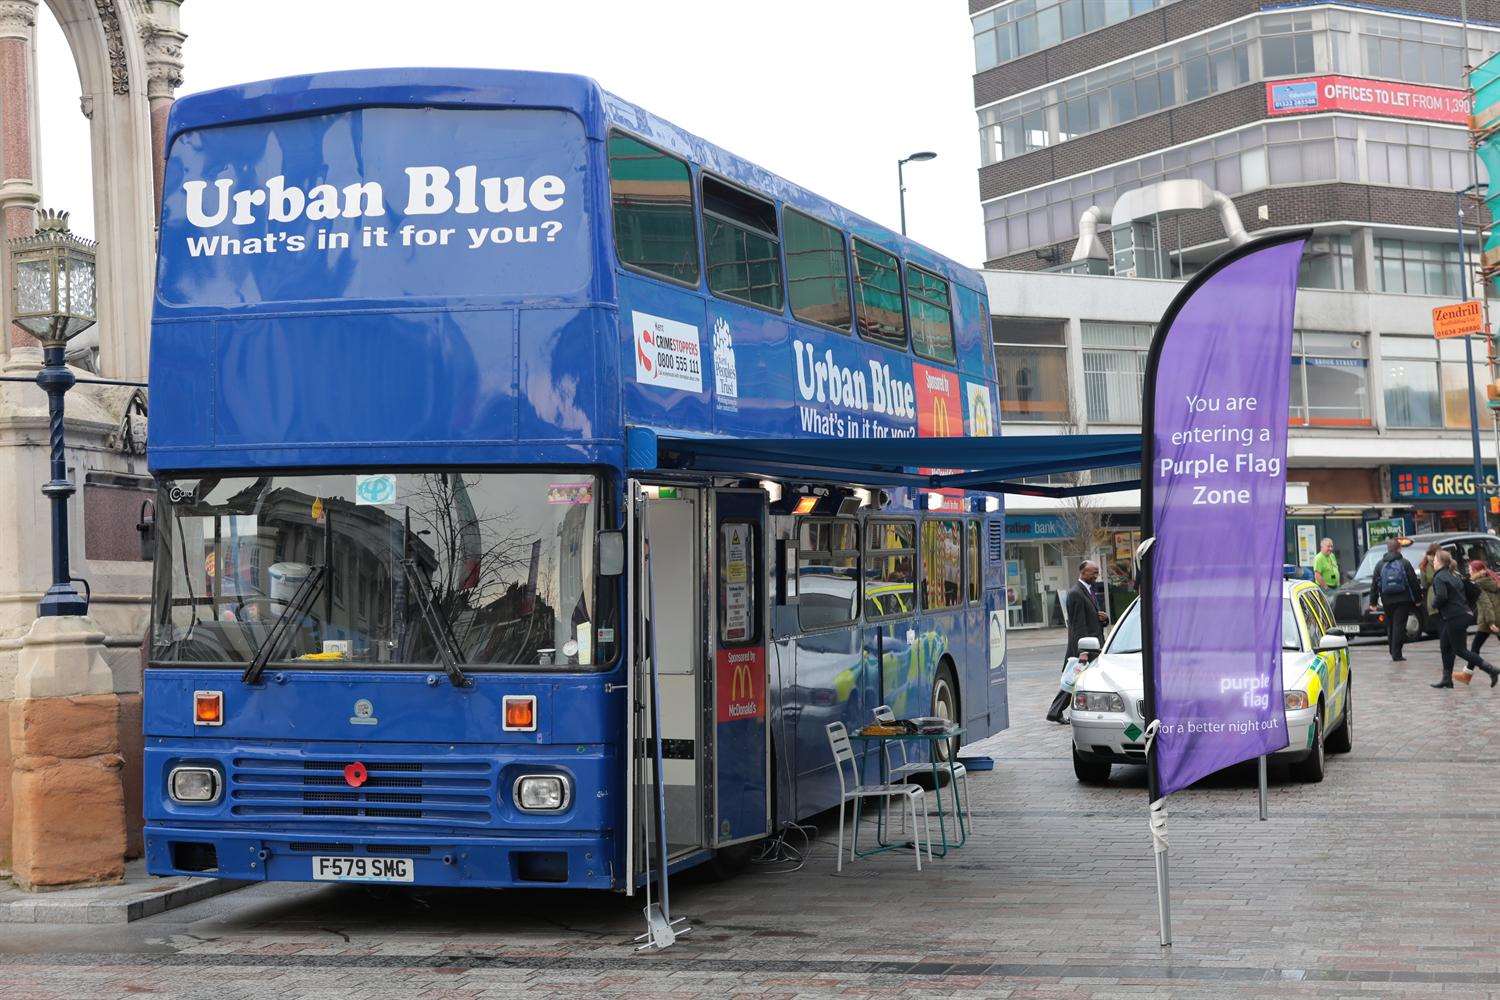 The Urban Blue Bus in Maidstone's Jubilee Square